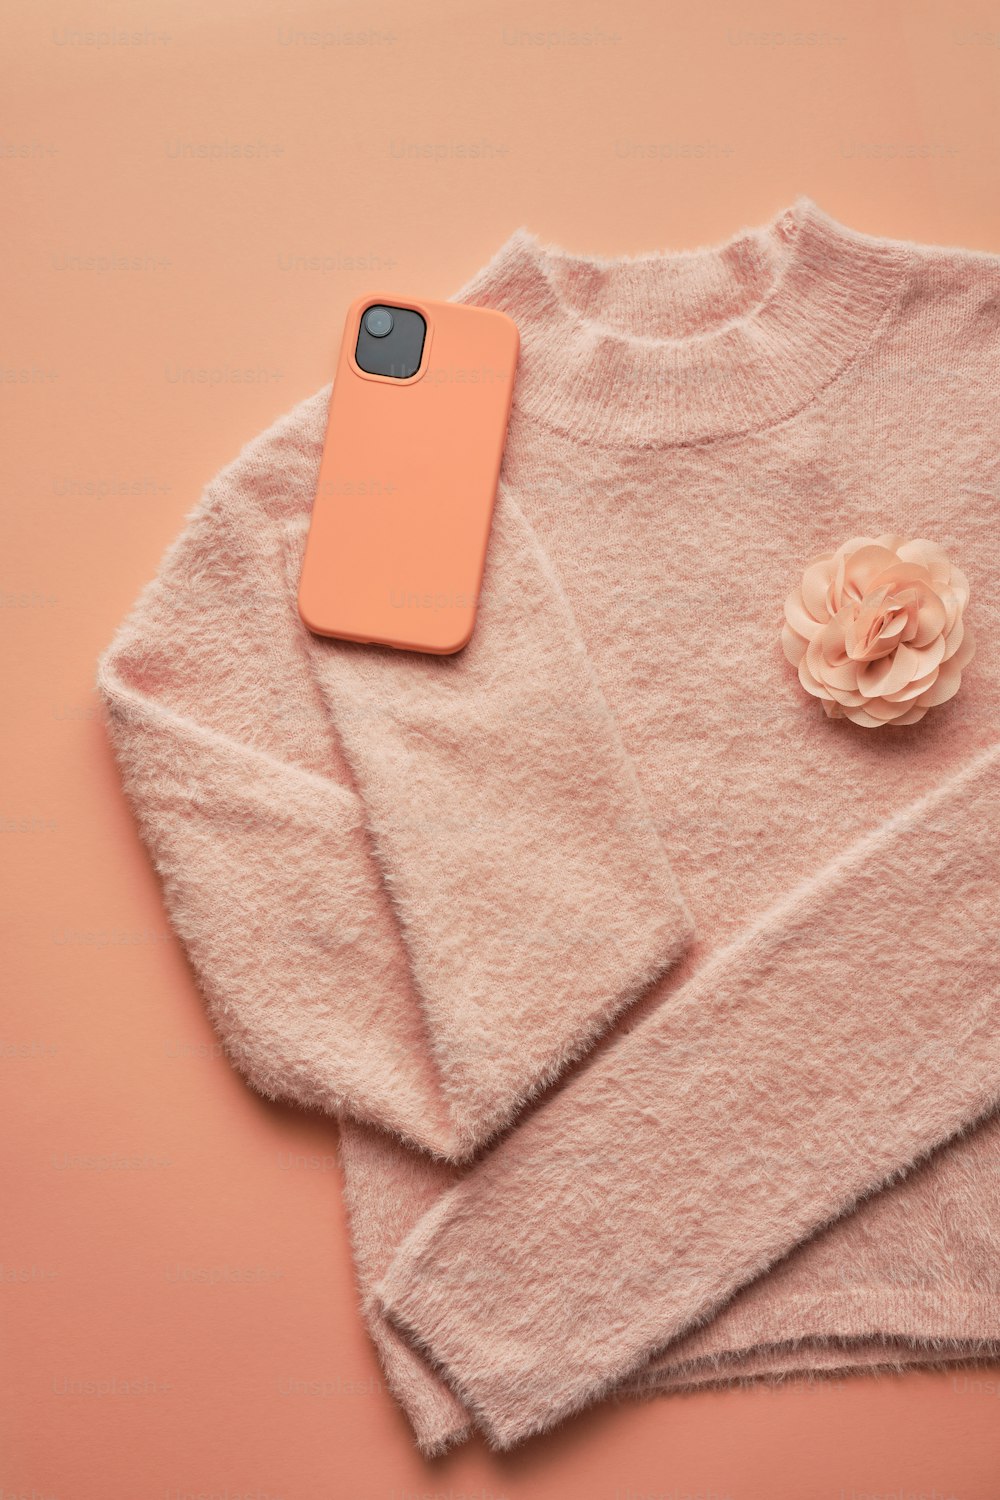 a cell phone laying on top of a pink sweater